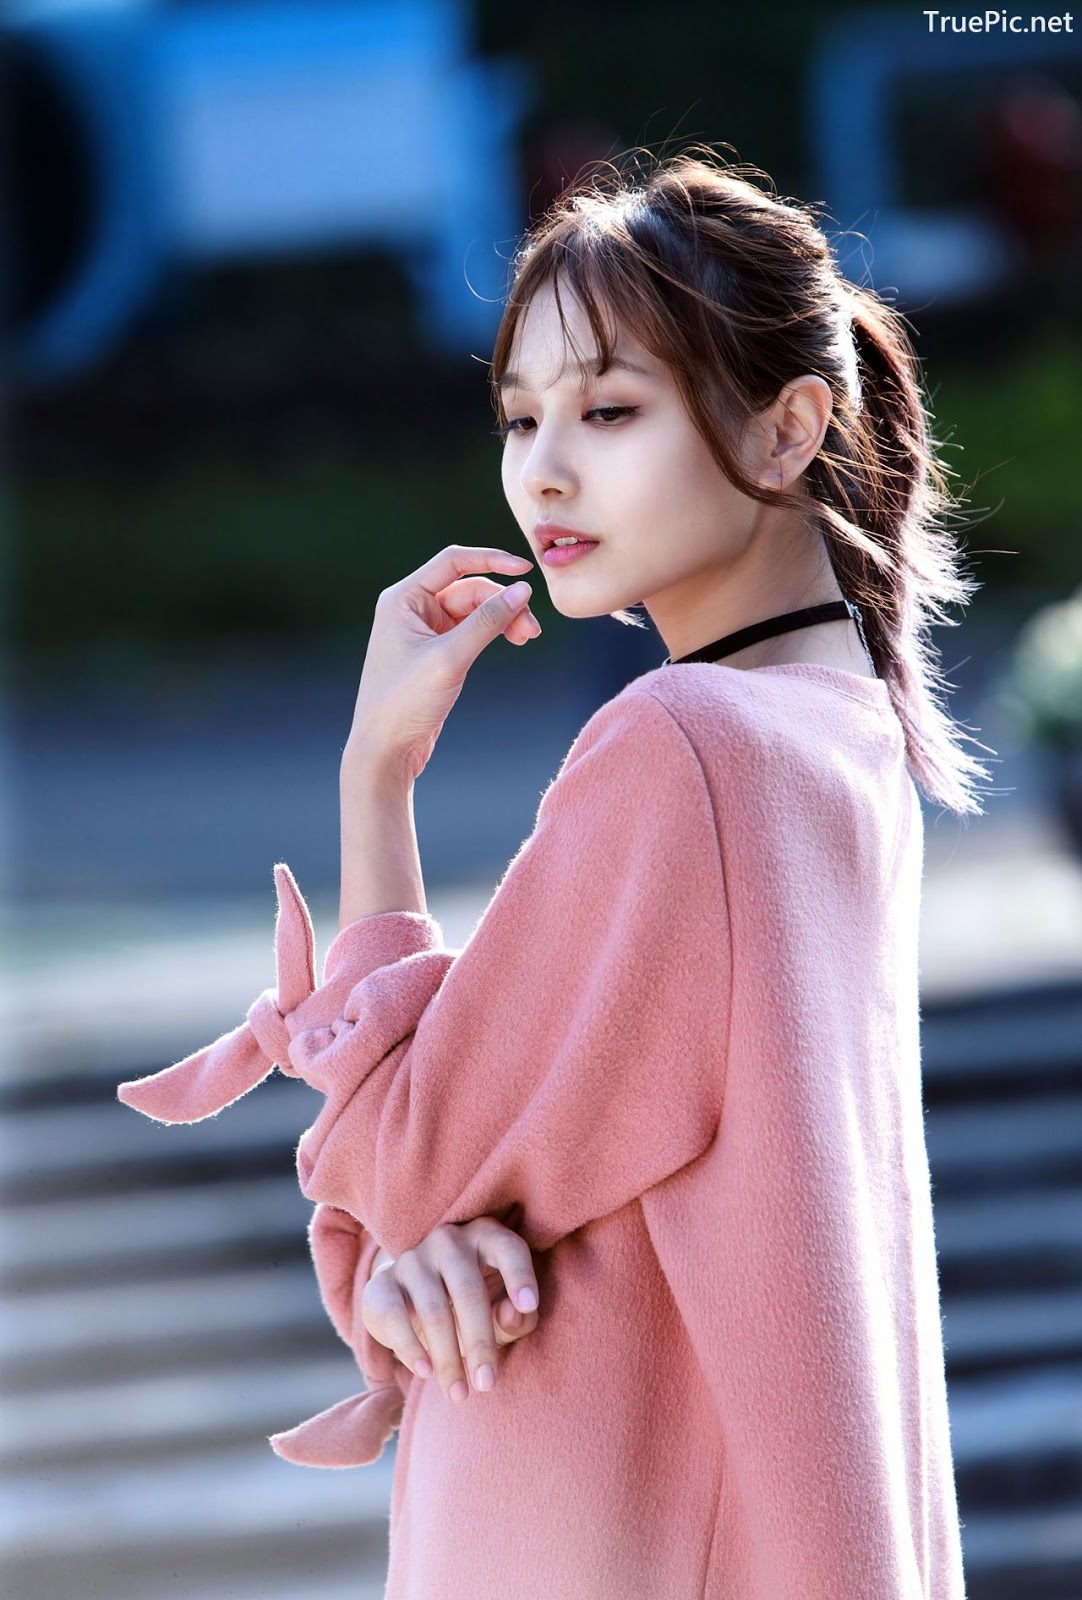 Image-Taiwanese-Model-郭思敏-Pure-And-Gorgeous-Girl-In-Pink-Sweater-Dress-TruePic.net- Picture-80